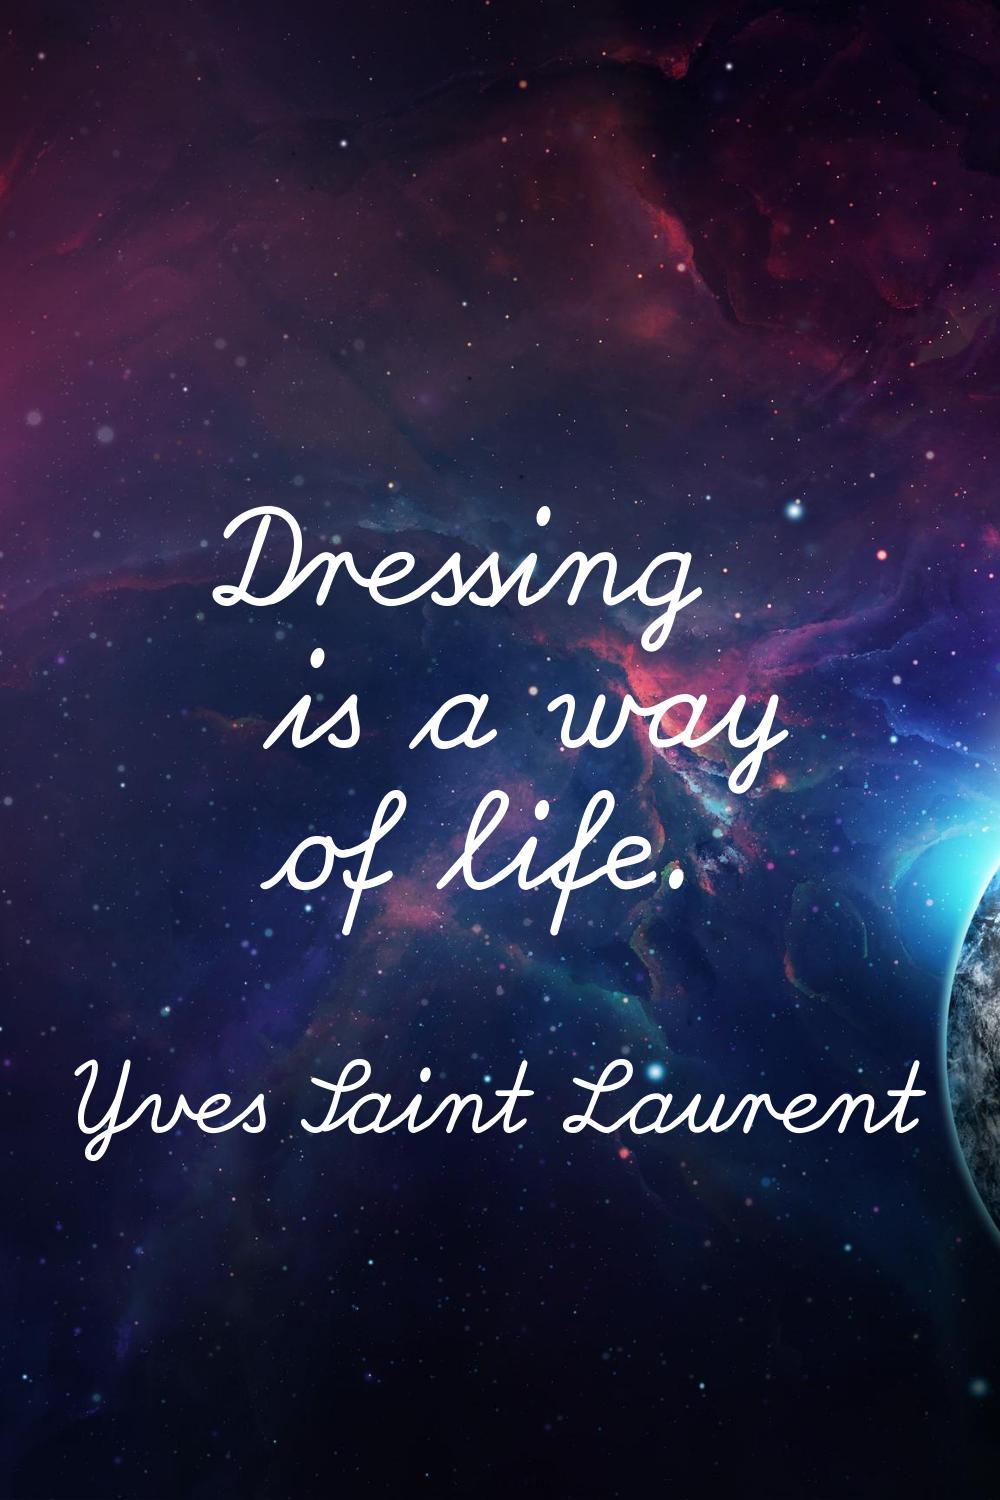 Dressing is a way of life.